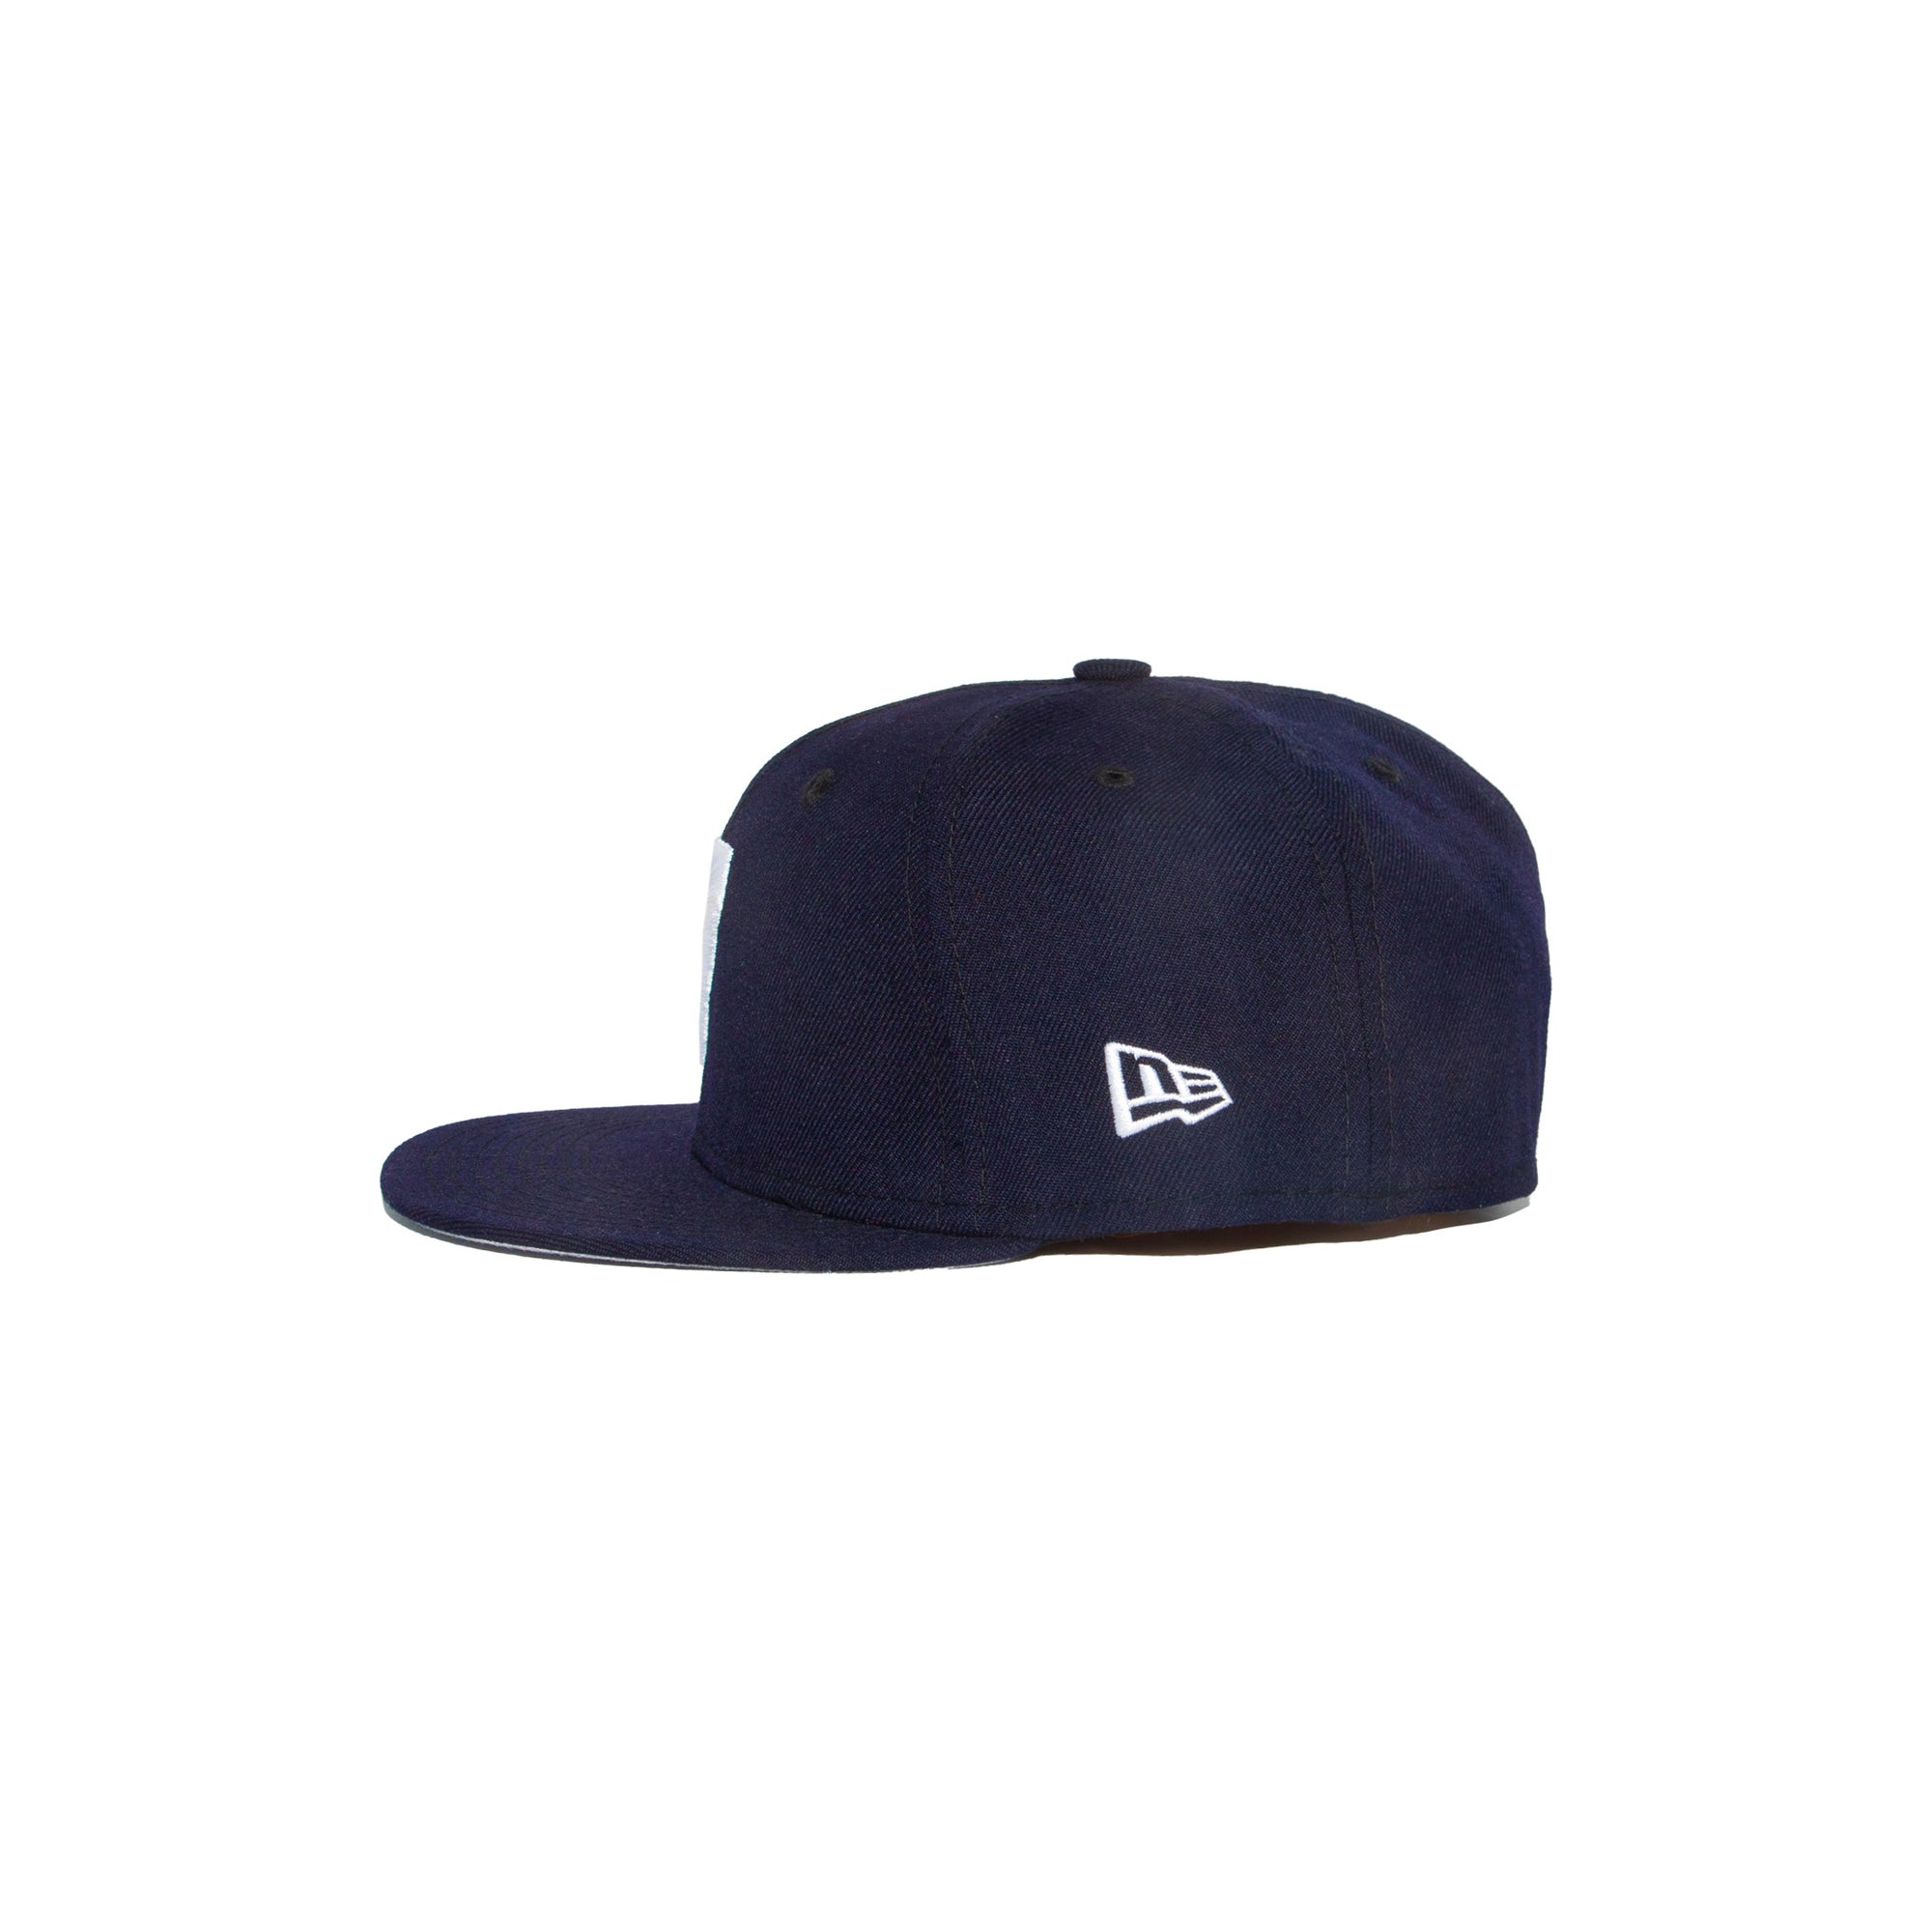 NAVY '7' FITTED